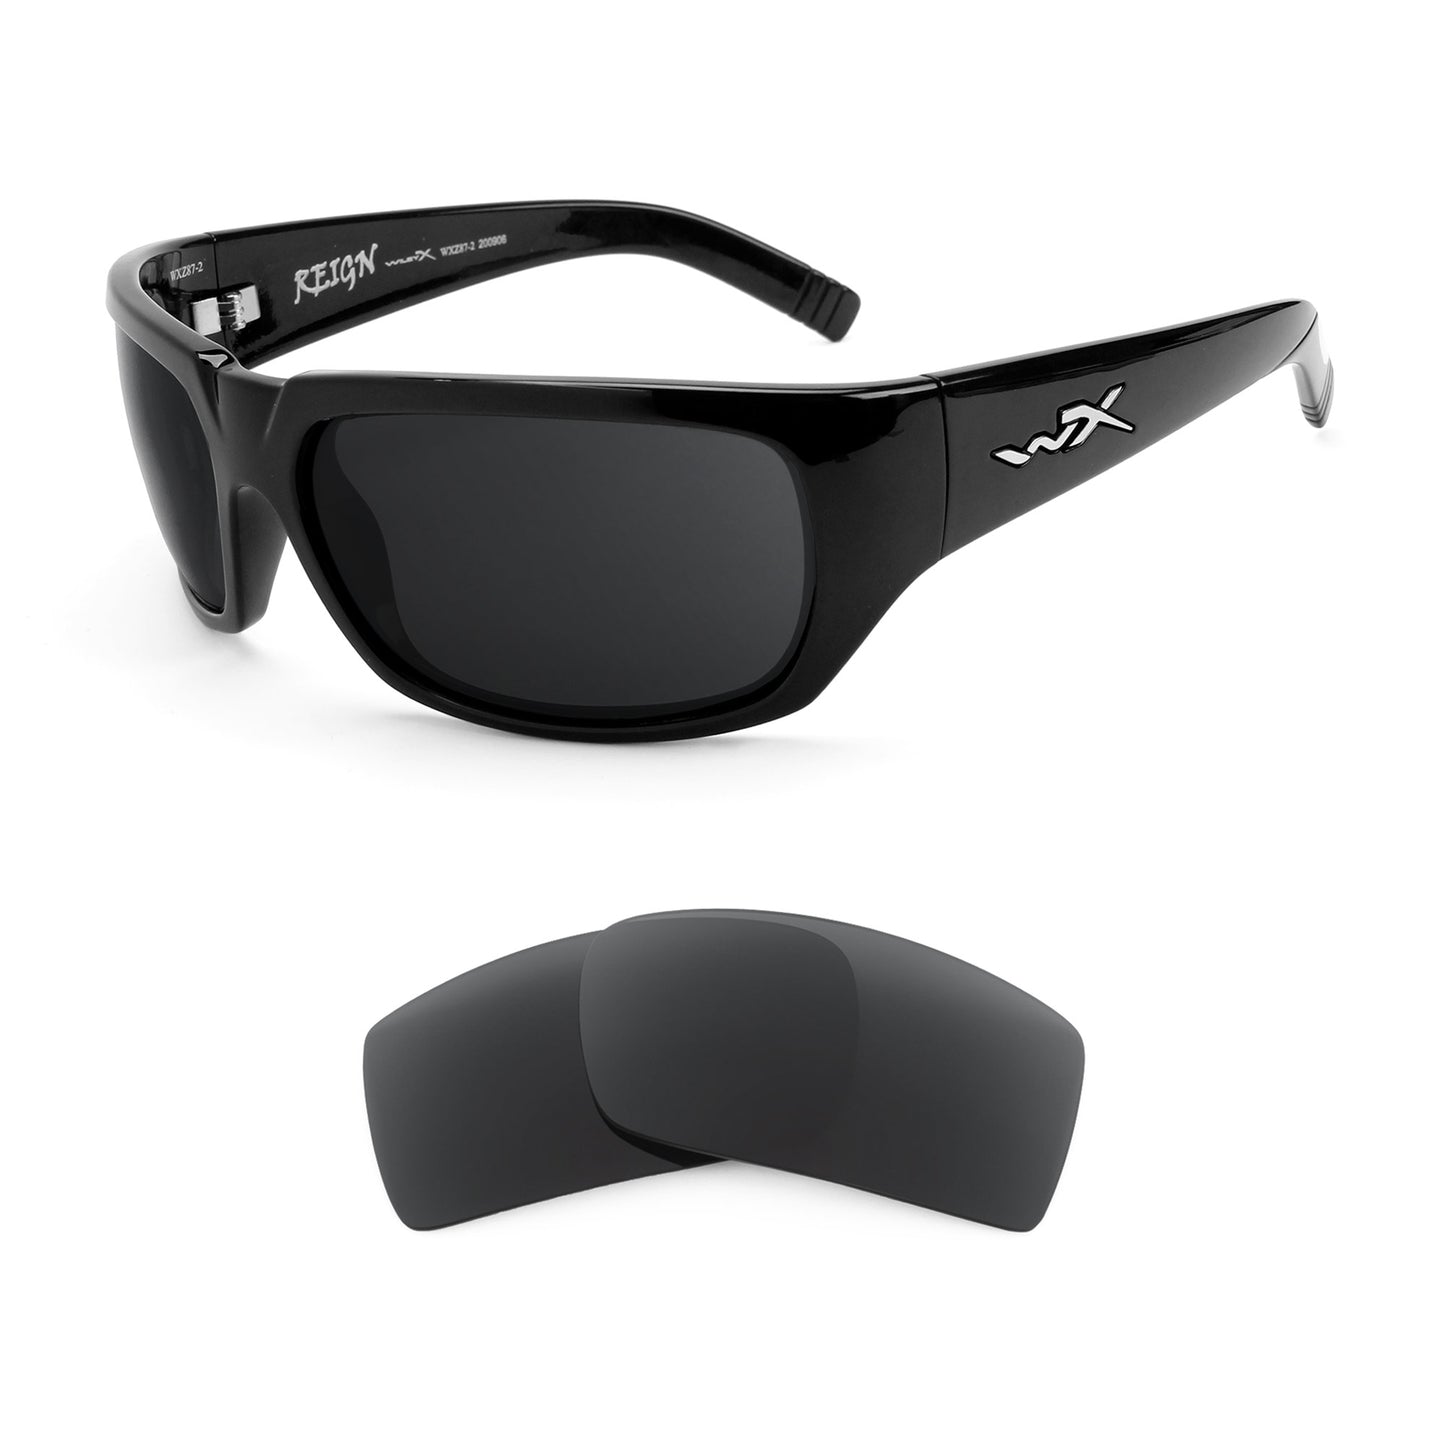 Wiley X Reign sunglasses with replacement lenses